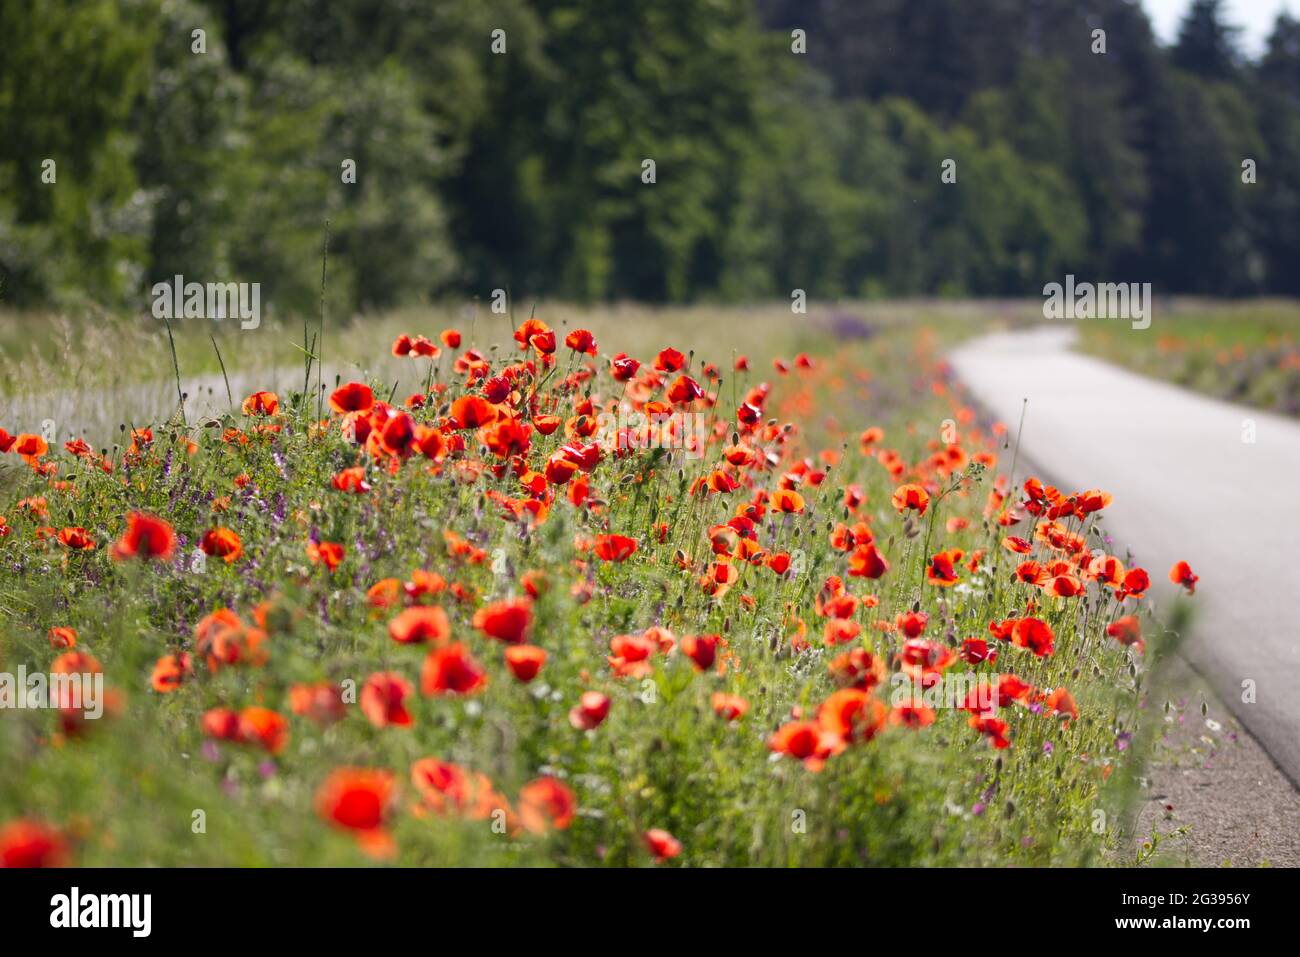 close up of a red poppies field Stock Photo